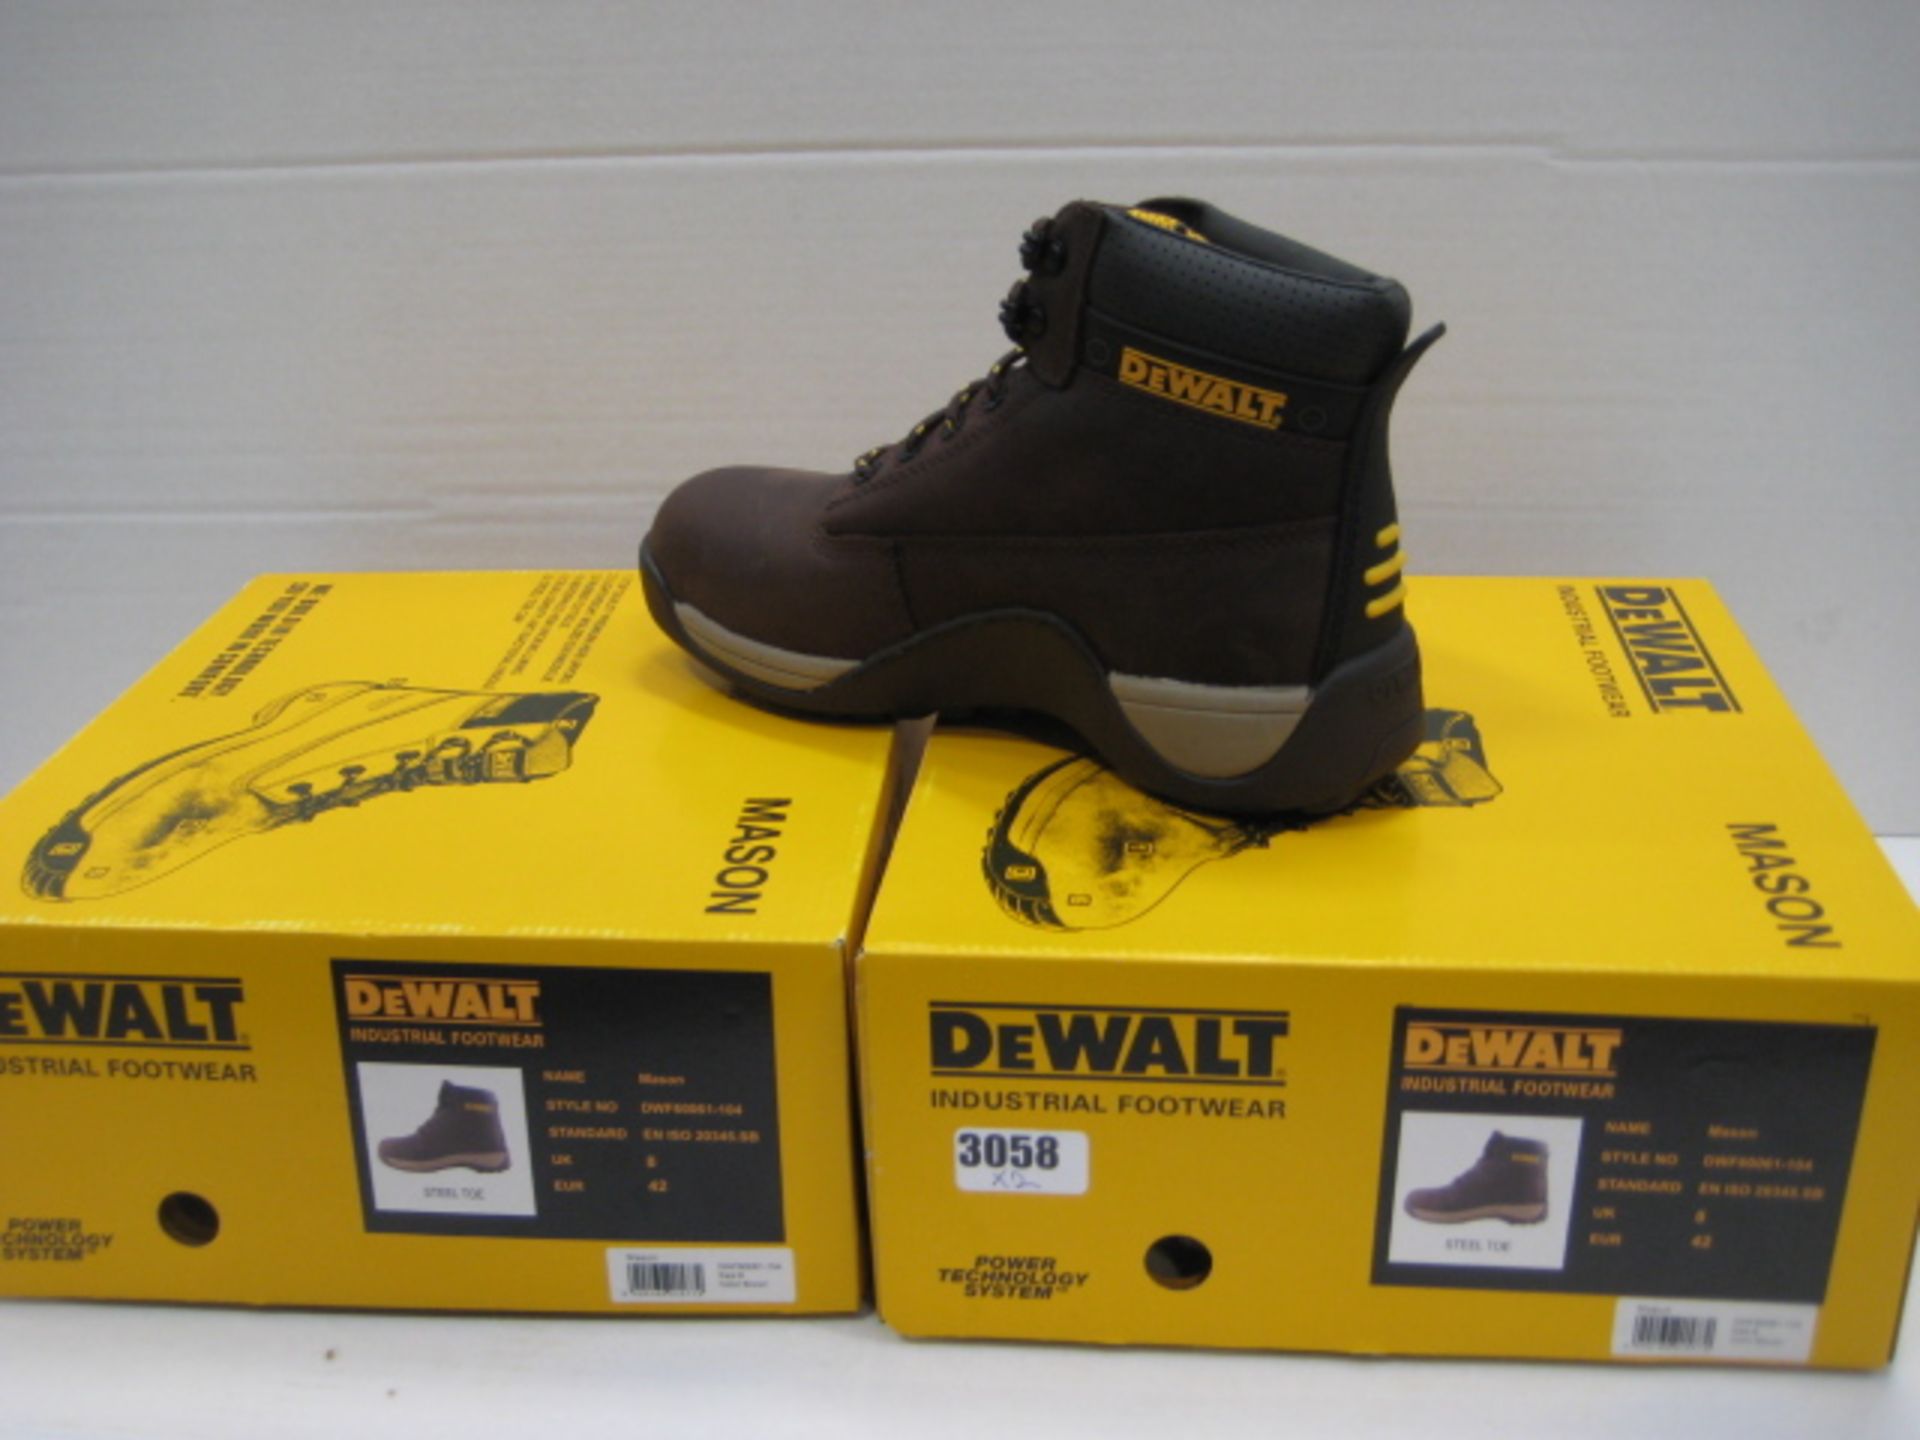 Two boxed pairs of Dewalt toe protector boots size 8 in dark brown